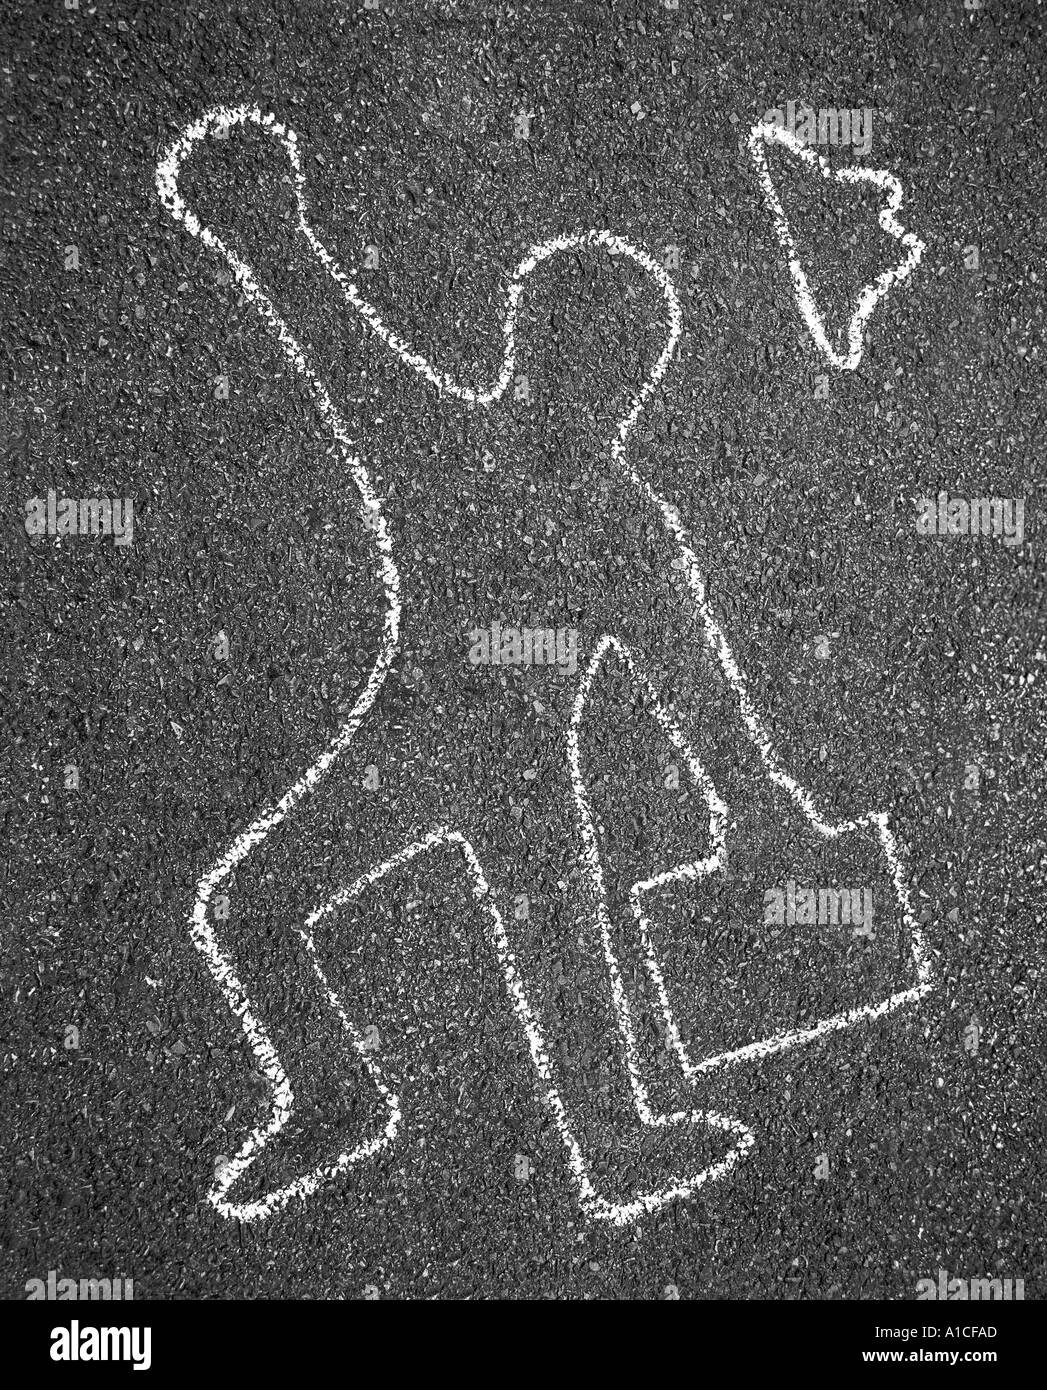 Chalk outline of businessman Stock Photo